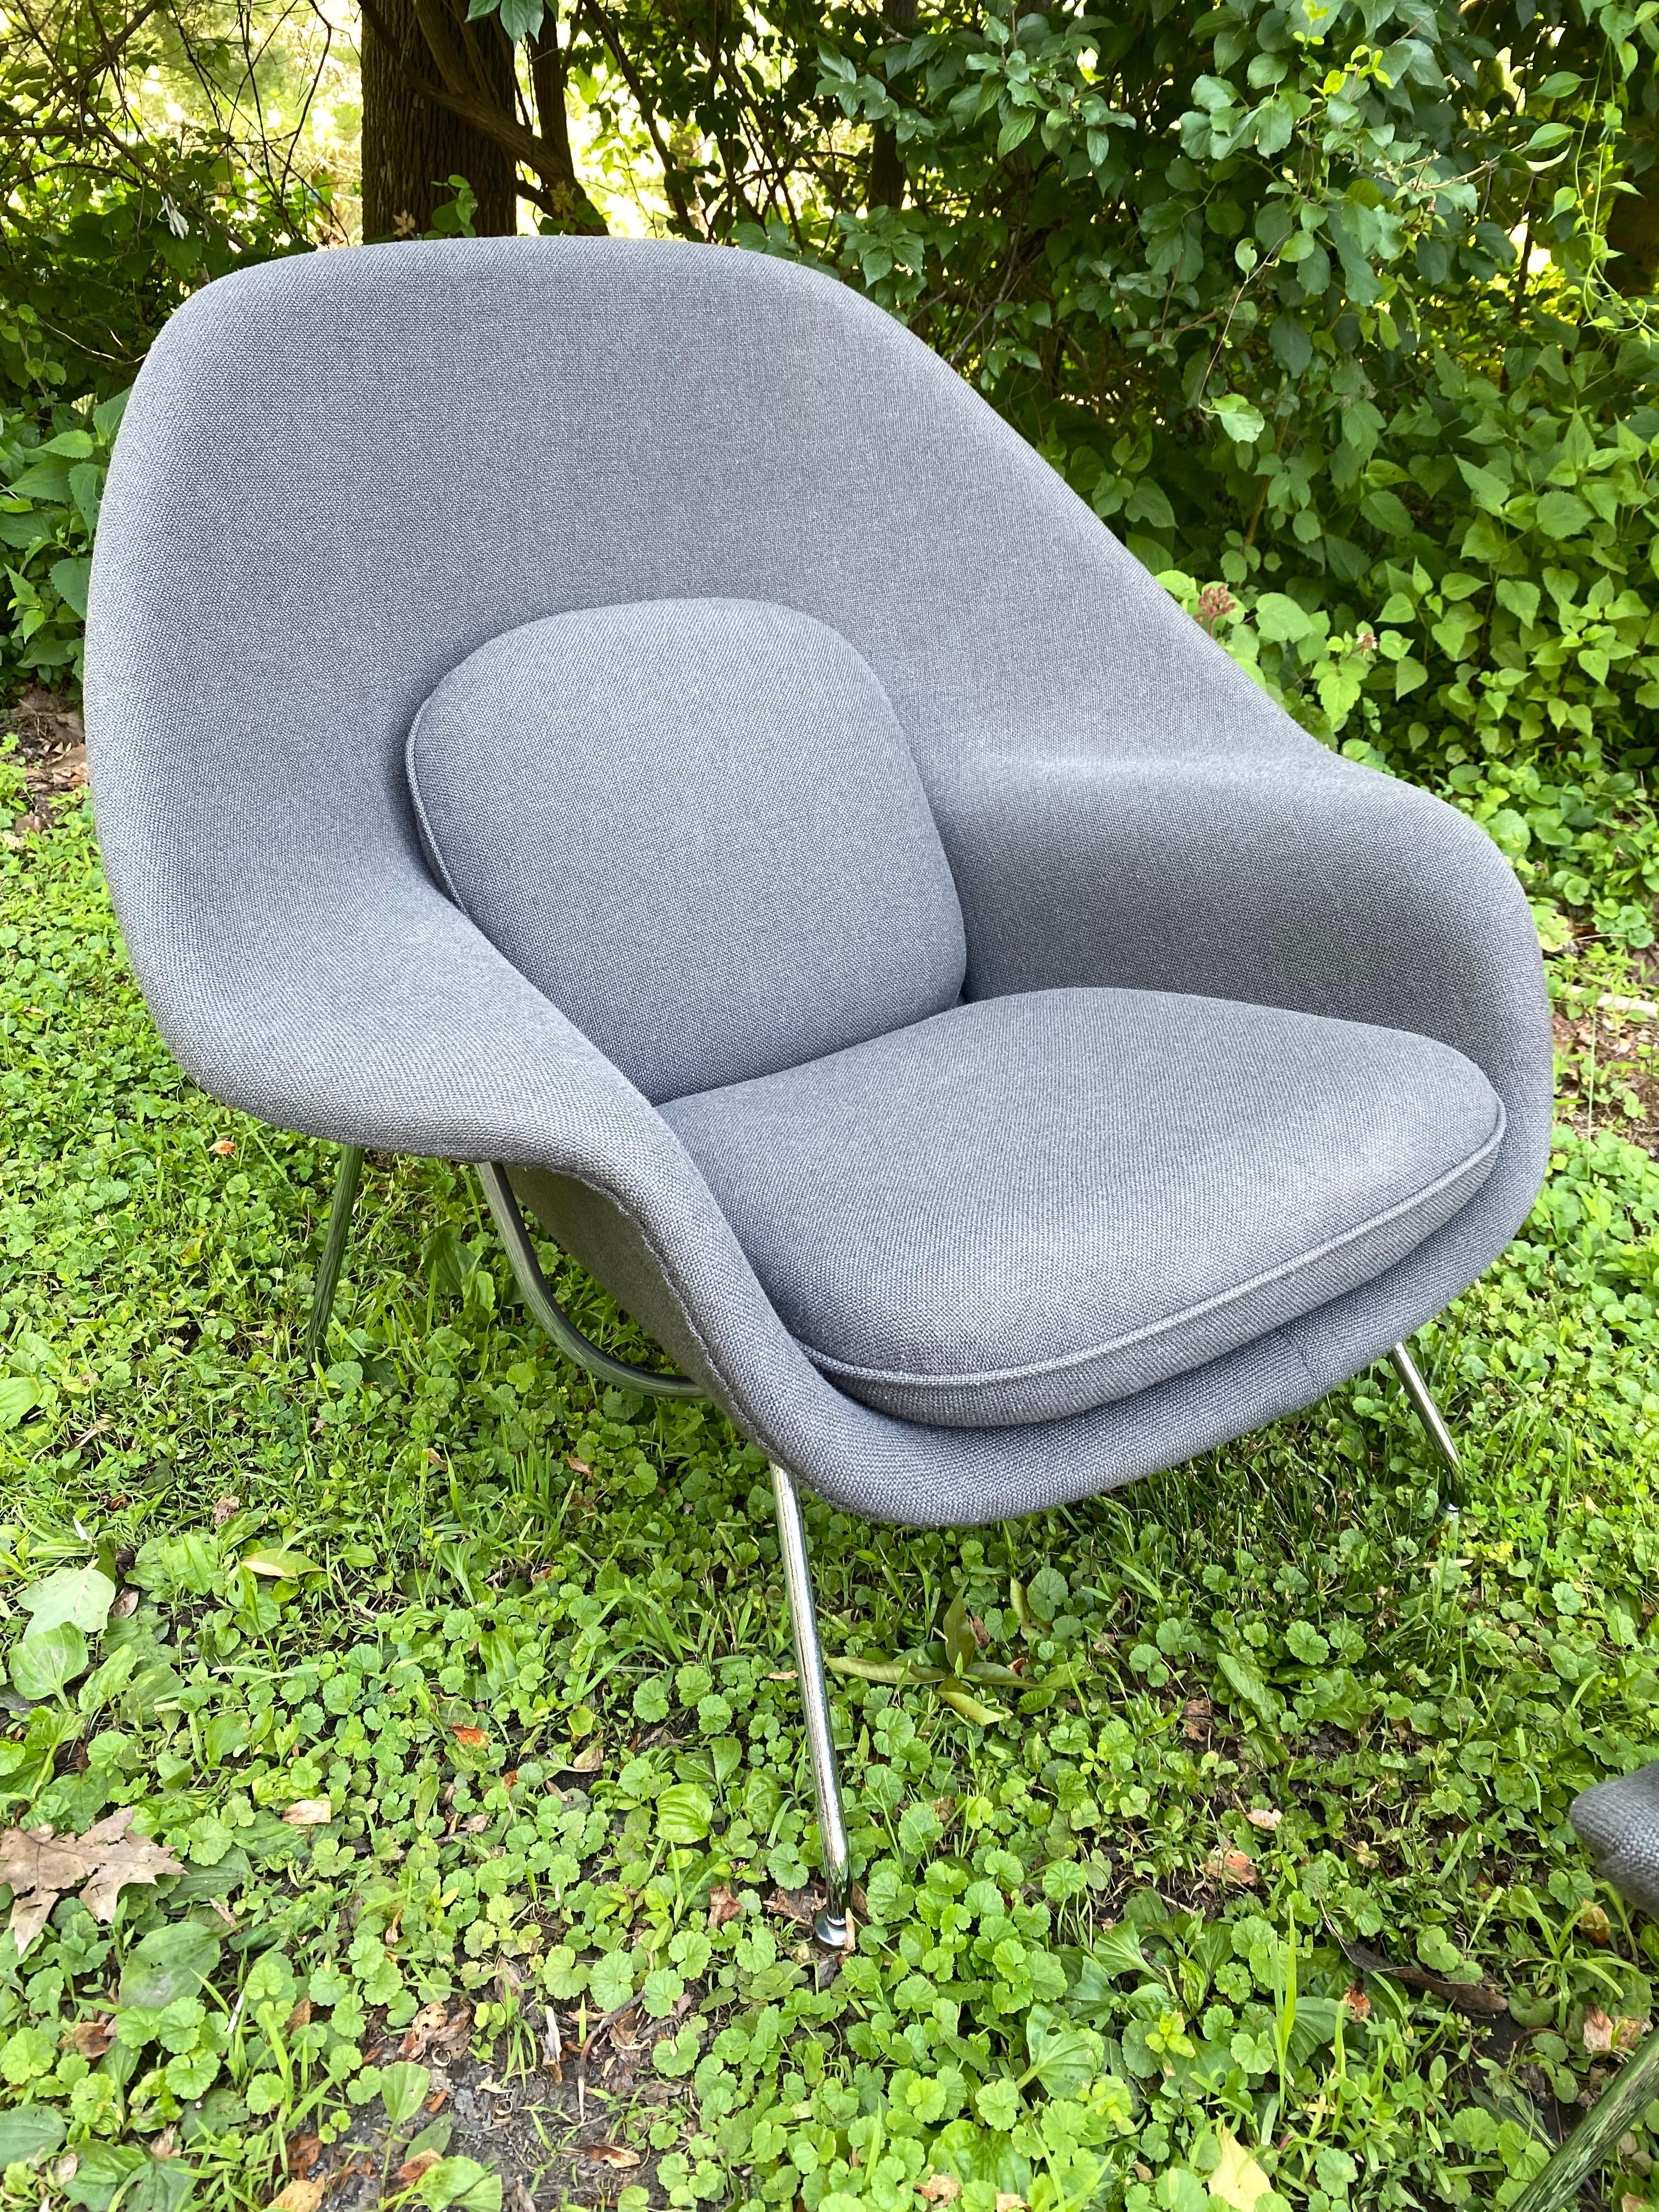 Eero Saarinen for knoll womb chair and ottoman reupholstered about 10 years ago in a medium gray fabric. Still looks very good and crazy comfortable! Chrome shows some wear as seen in photos, but really only noticeable when very close! Retains